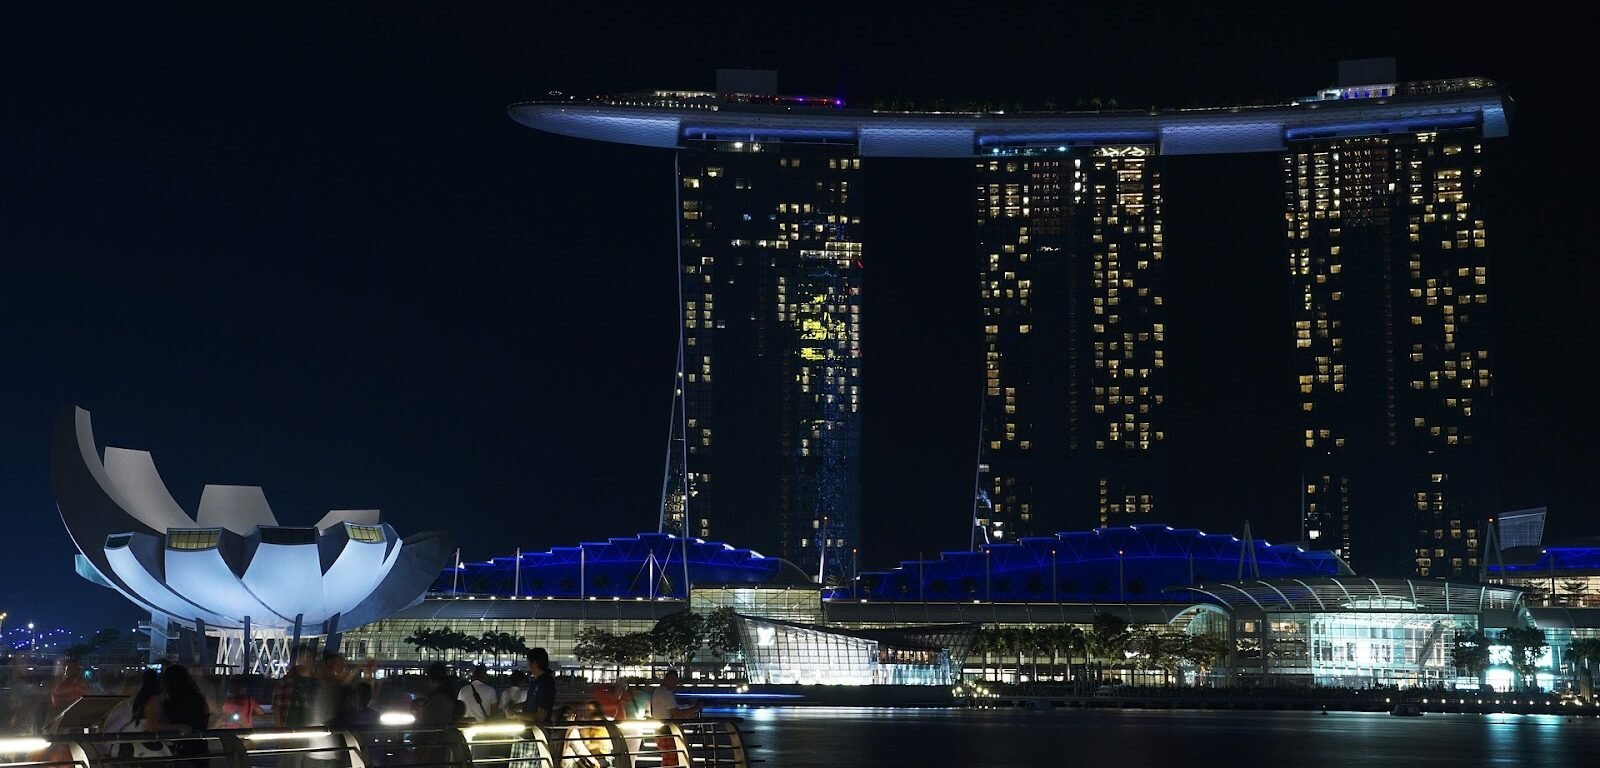 Marina Bay Sands and the ArtScience Museum in Singapore